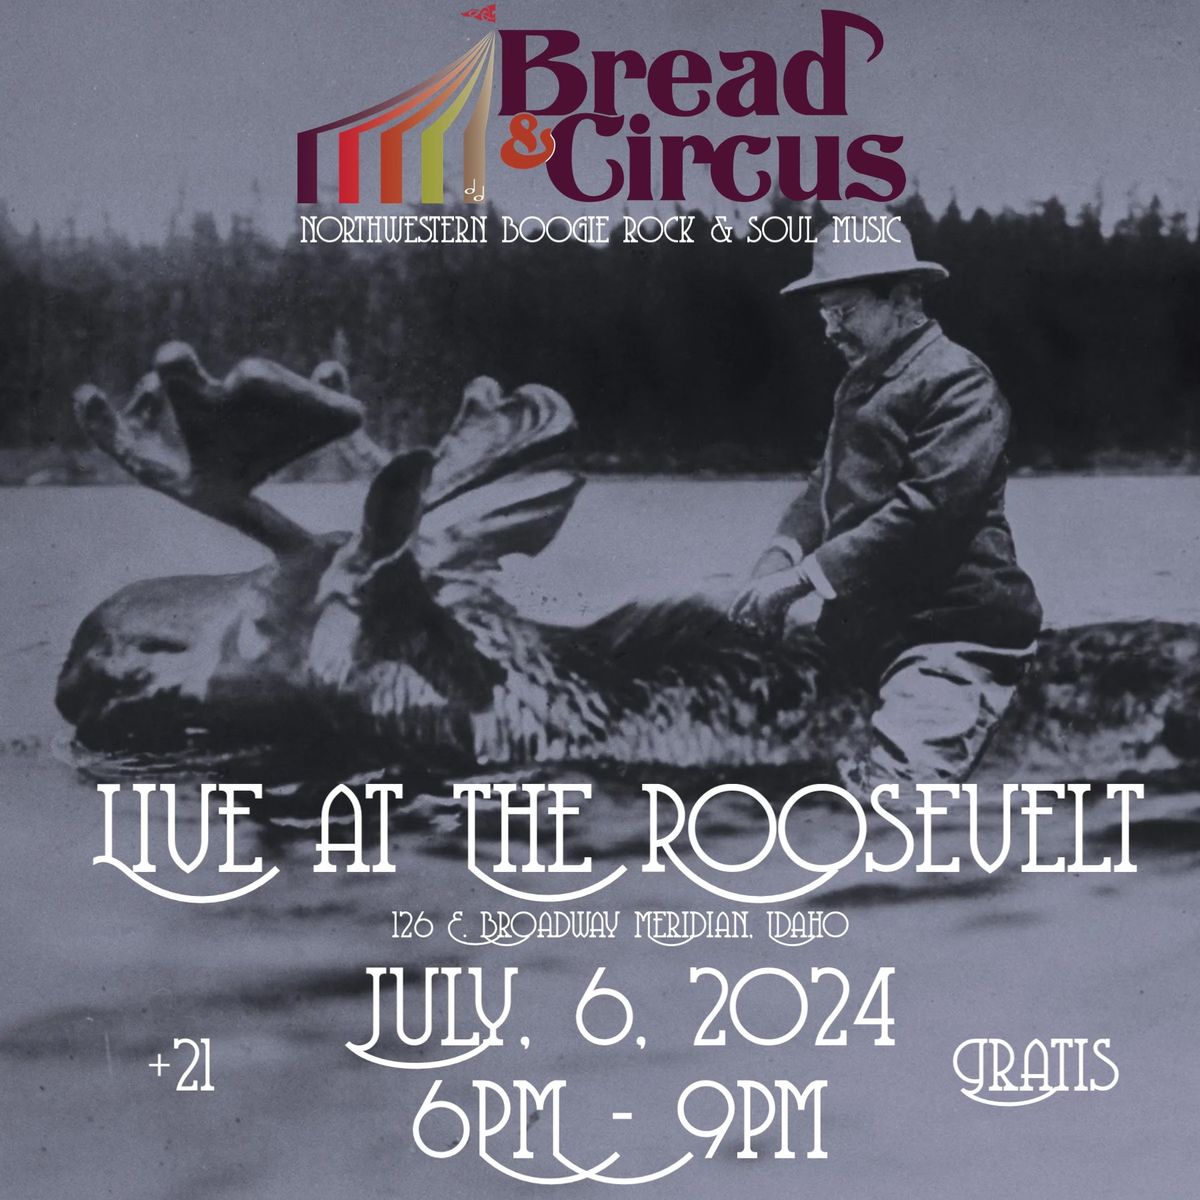 Bread & Circus live at The Roosevelt 